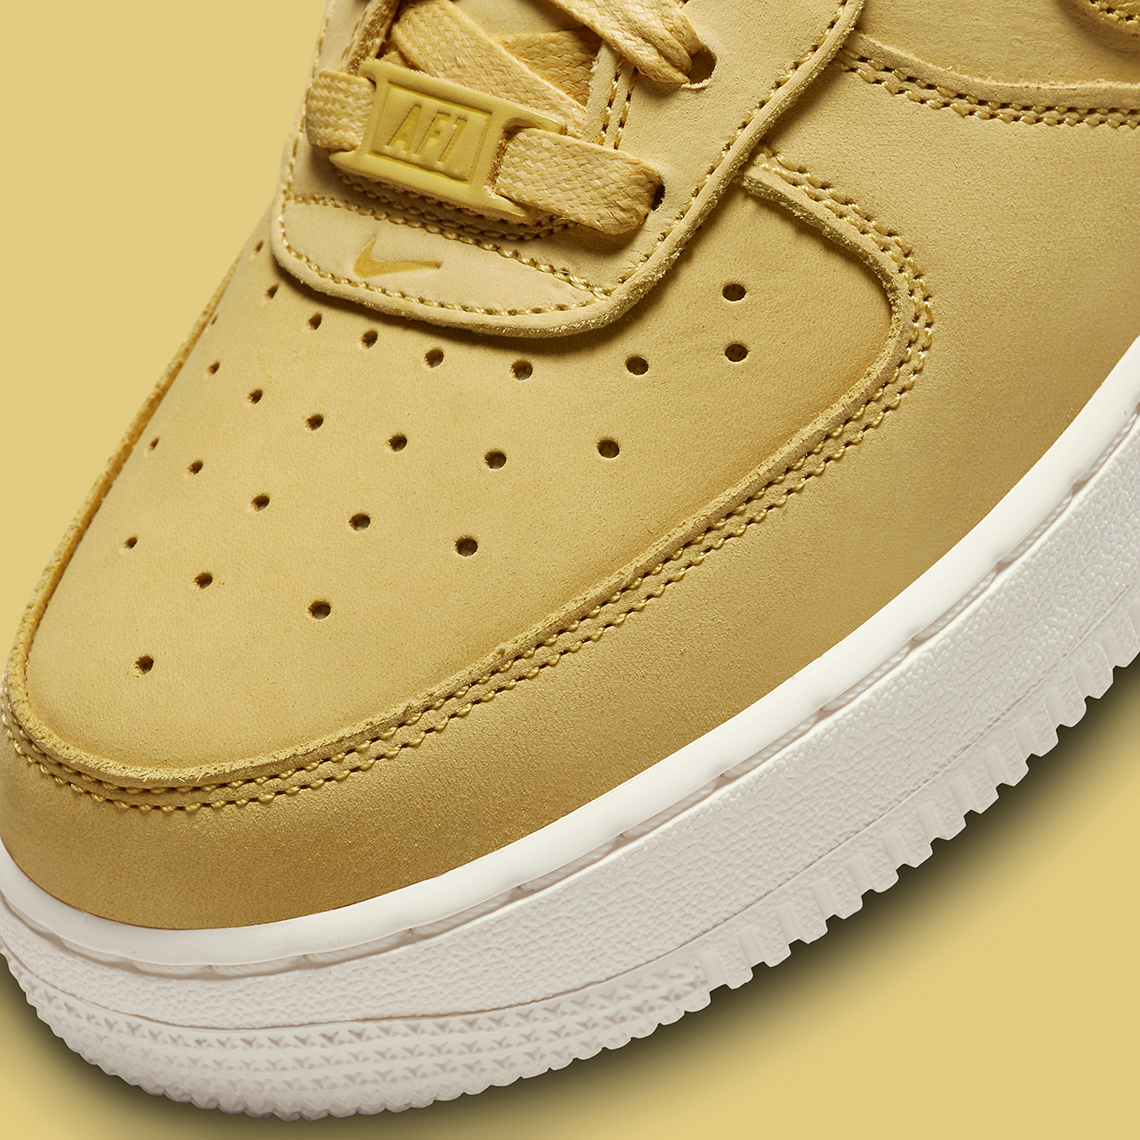 nike air force 1 low gold nubuck dr9503 700 4